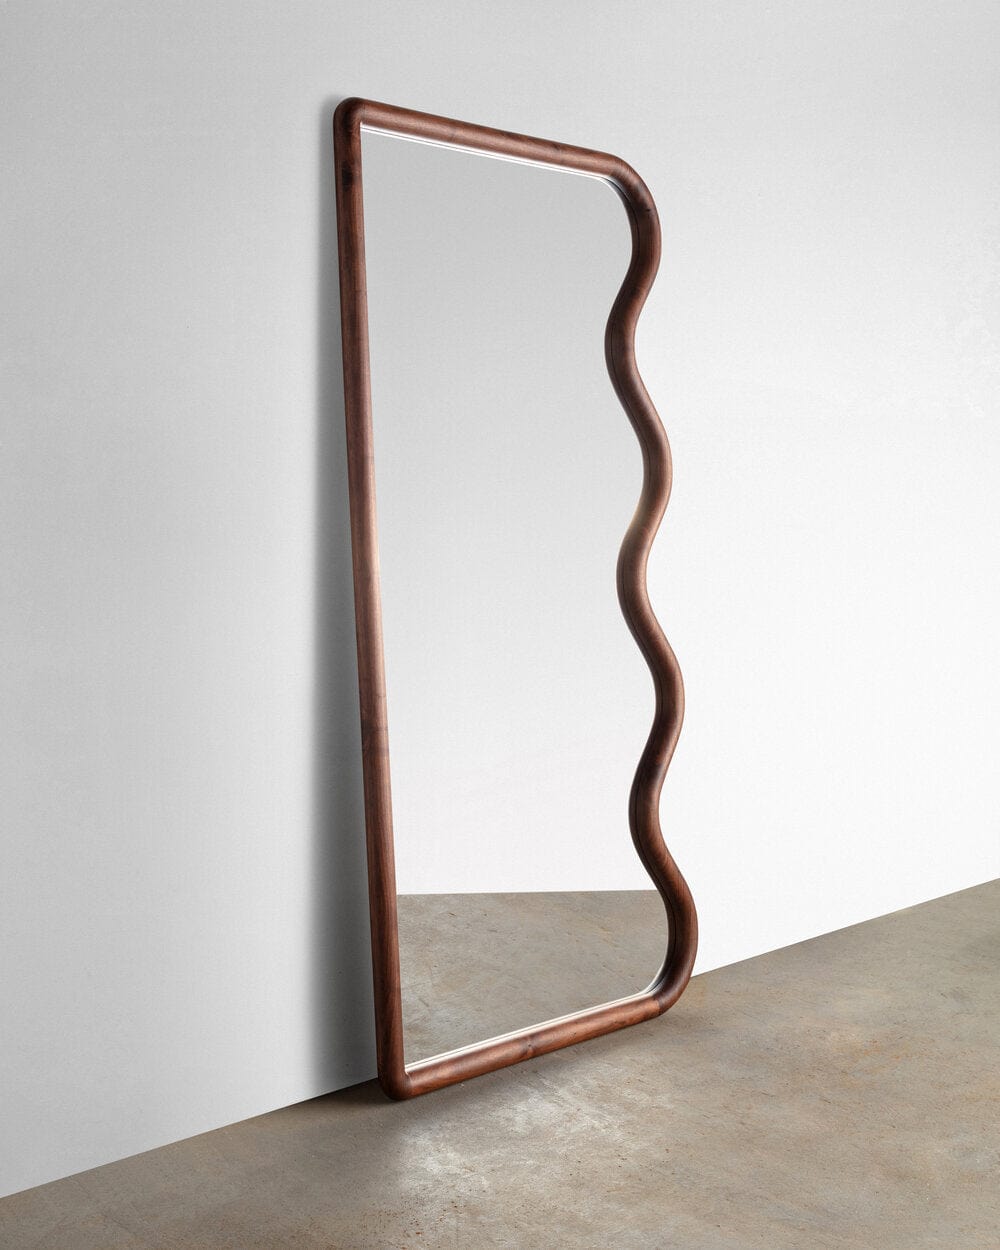 SQUIGGLE MIRROR BY CHRISTOPHER MIANO